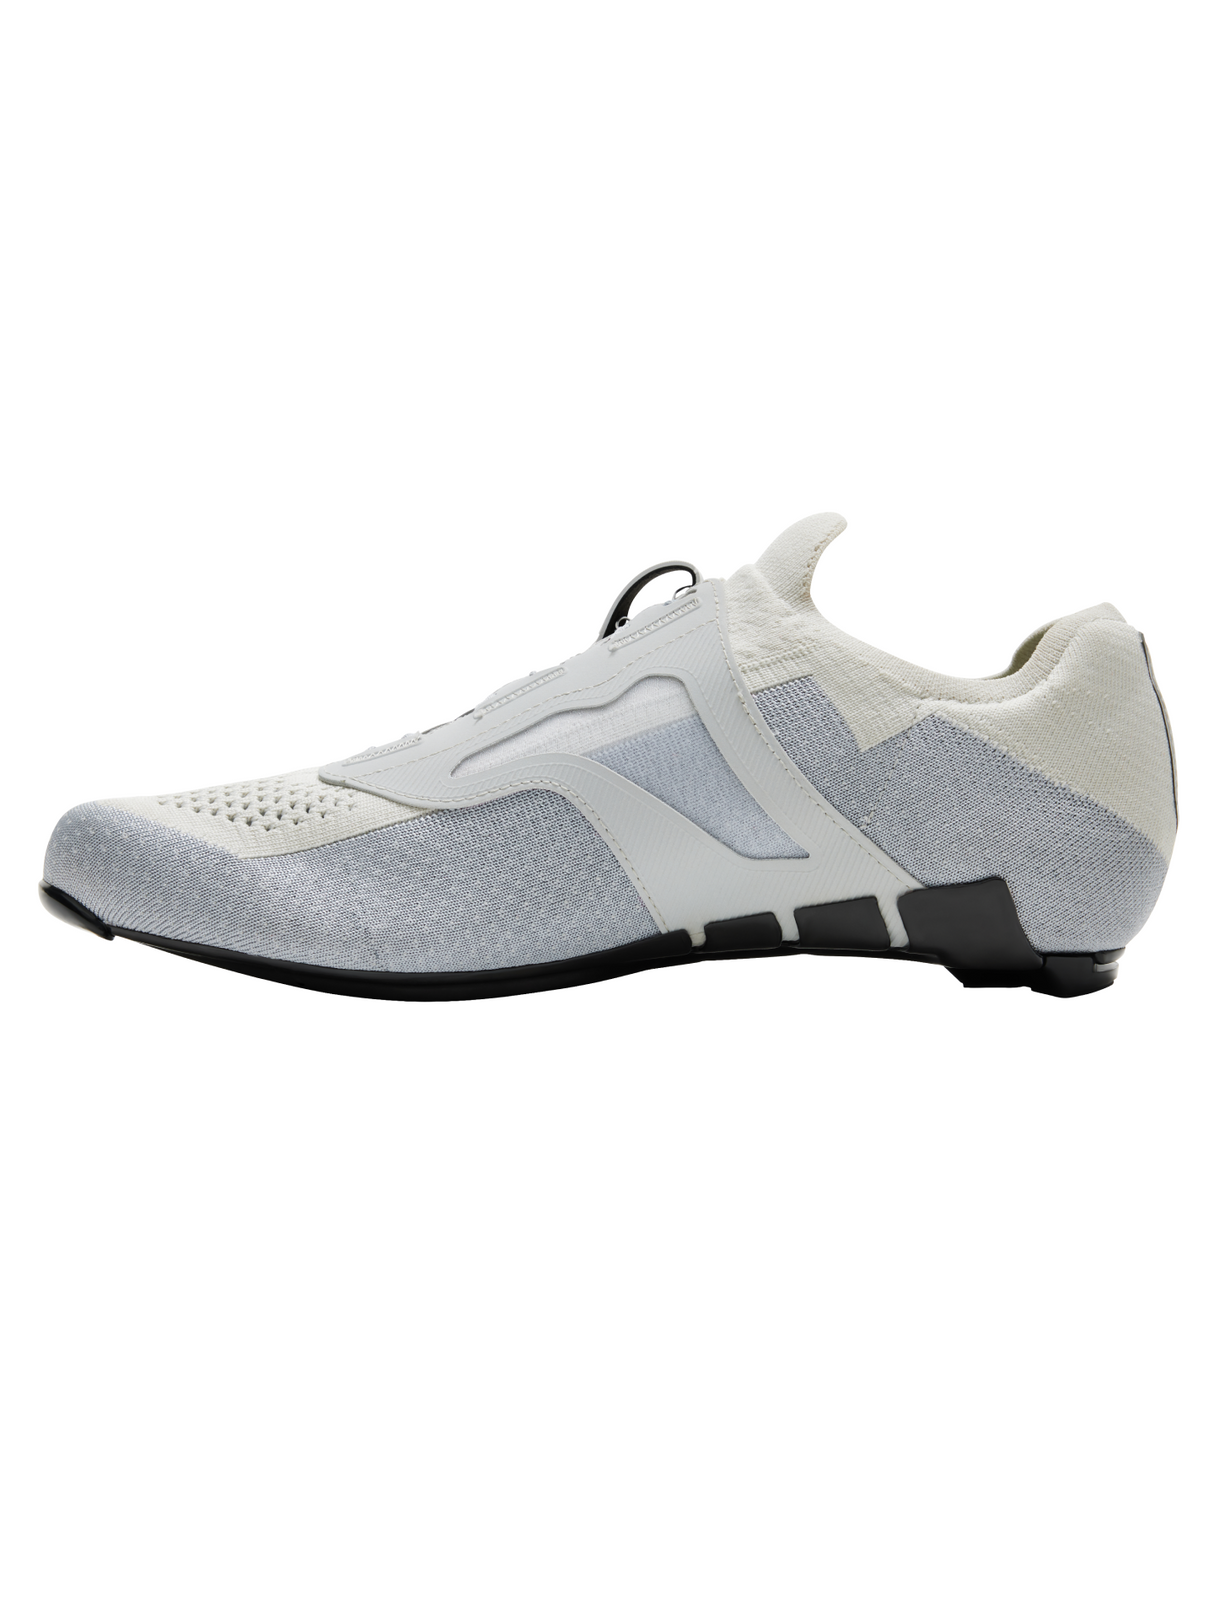 Dottore Clima Road Shoes Ice Grey